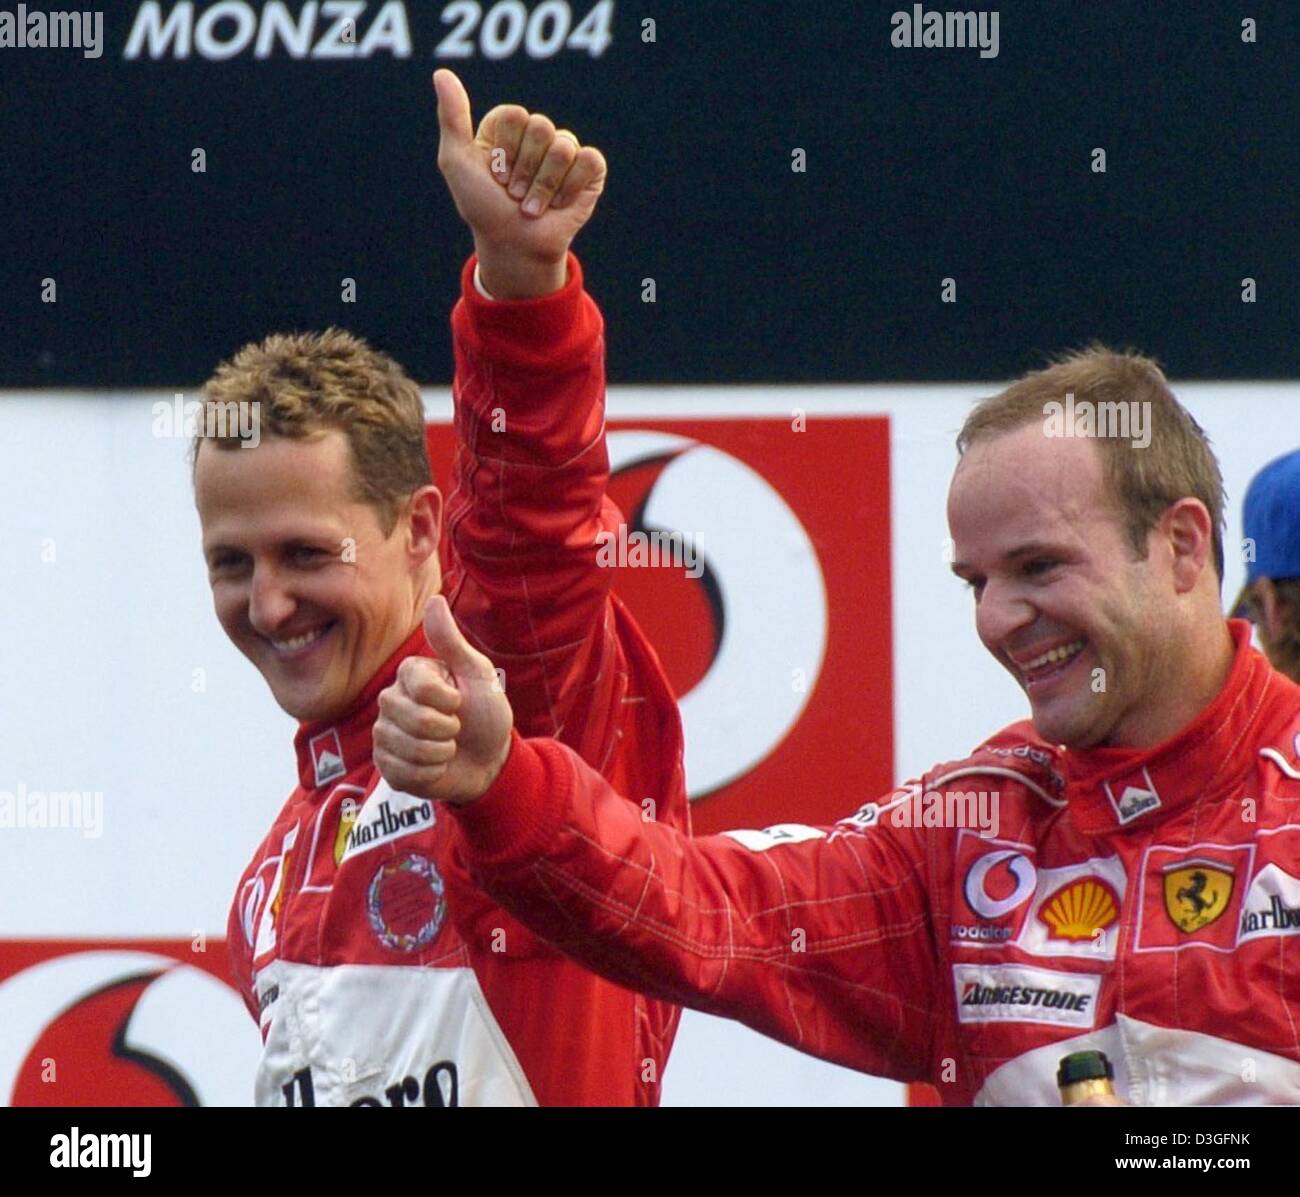 (dpa) - Ferrari Formula 1 drivers Rubens Barrichello (R) from Brazil and his German teammate Michael Schumacher (L) jubilate after the end of the Italian Grand Prix in Monza, Italy, 12 September 2004. Barrichello won the race with Schumacher coming in second to give Ferrari its 9th 1-2 finish of the current racing season. Stock Photo